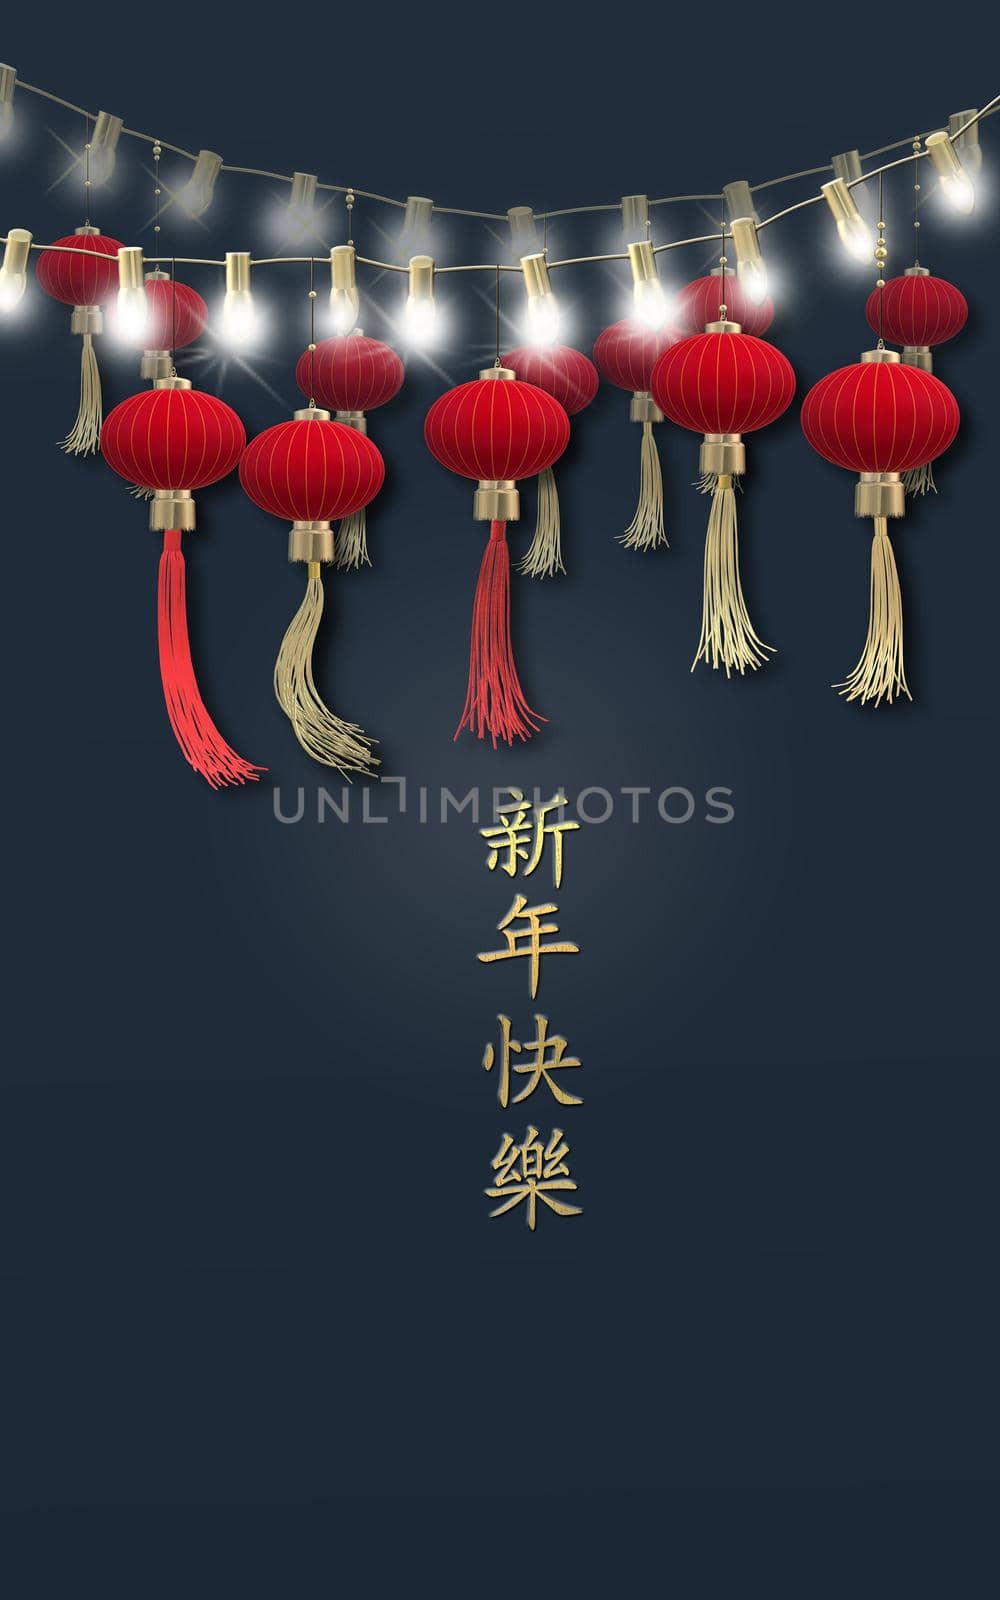 Traditional Chinese lanterns on string of lights on blue background. Template for Chinese New Year, Lantern festival celebration. Text Happy Chinese new year, 3D rendering illustration